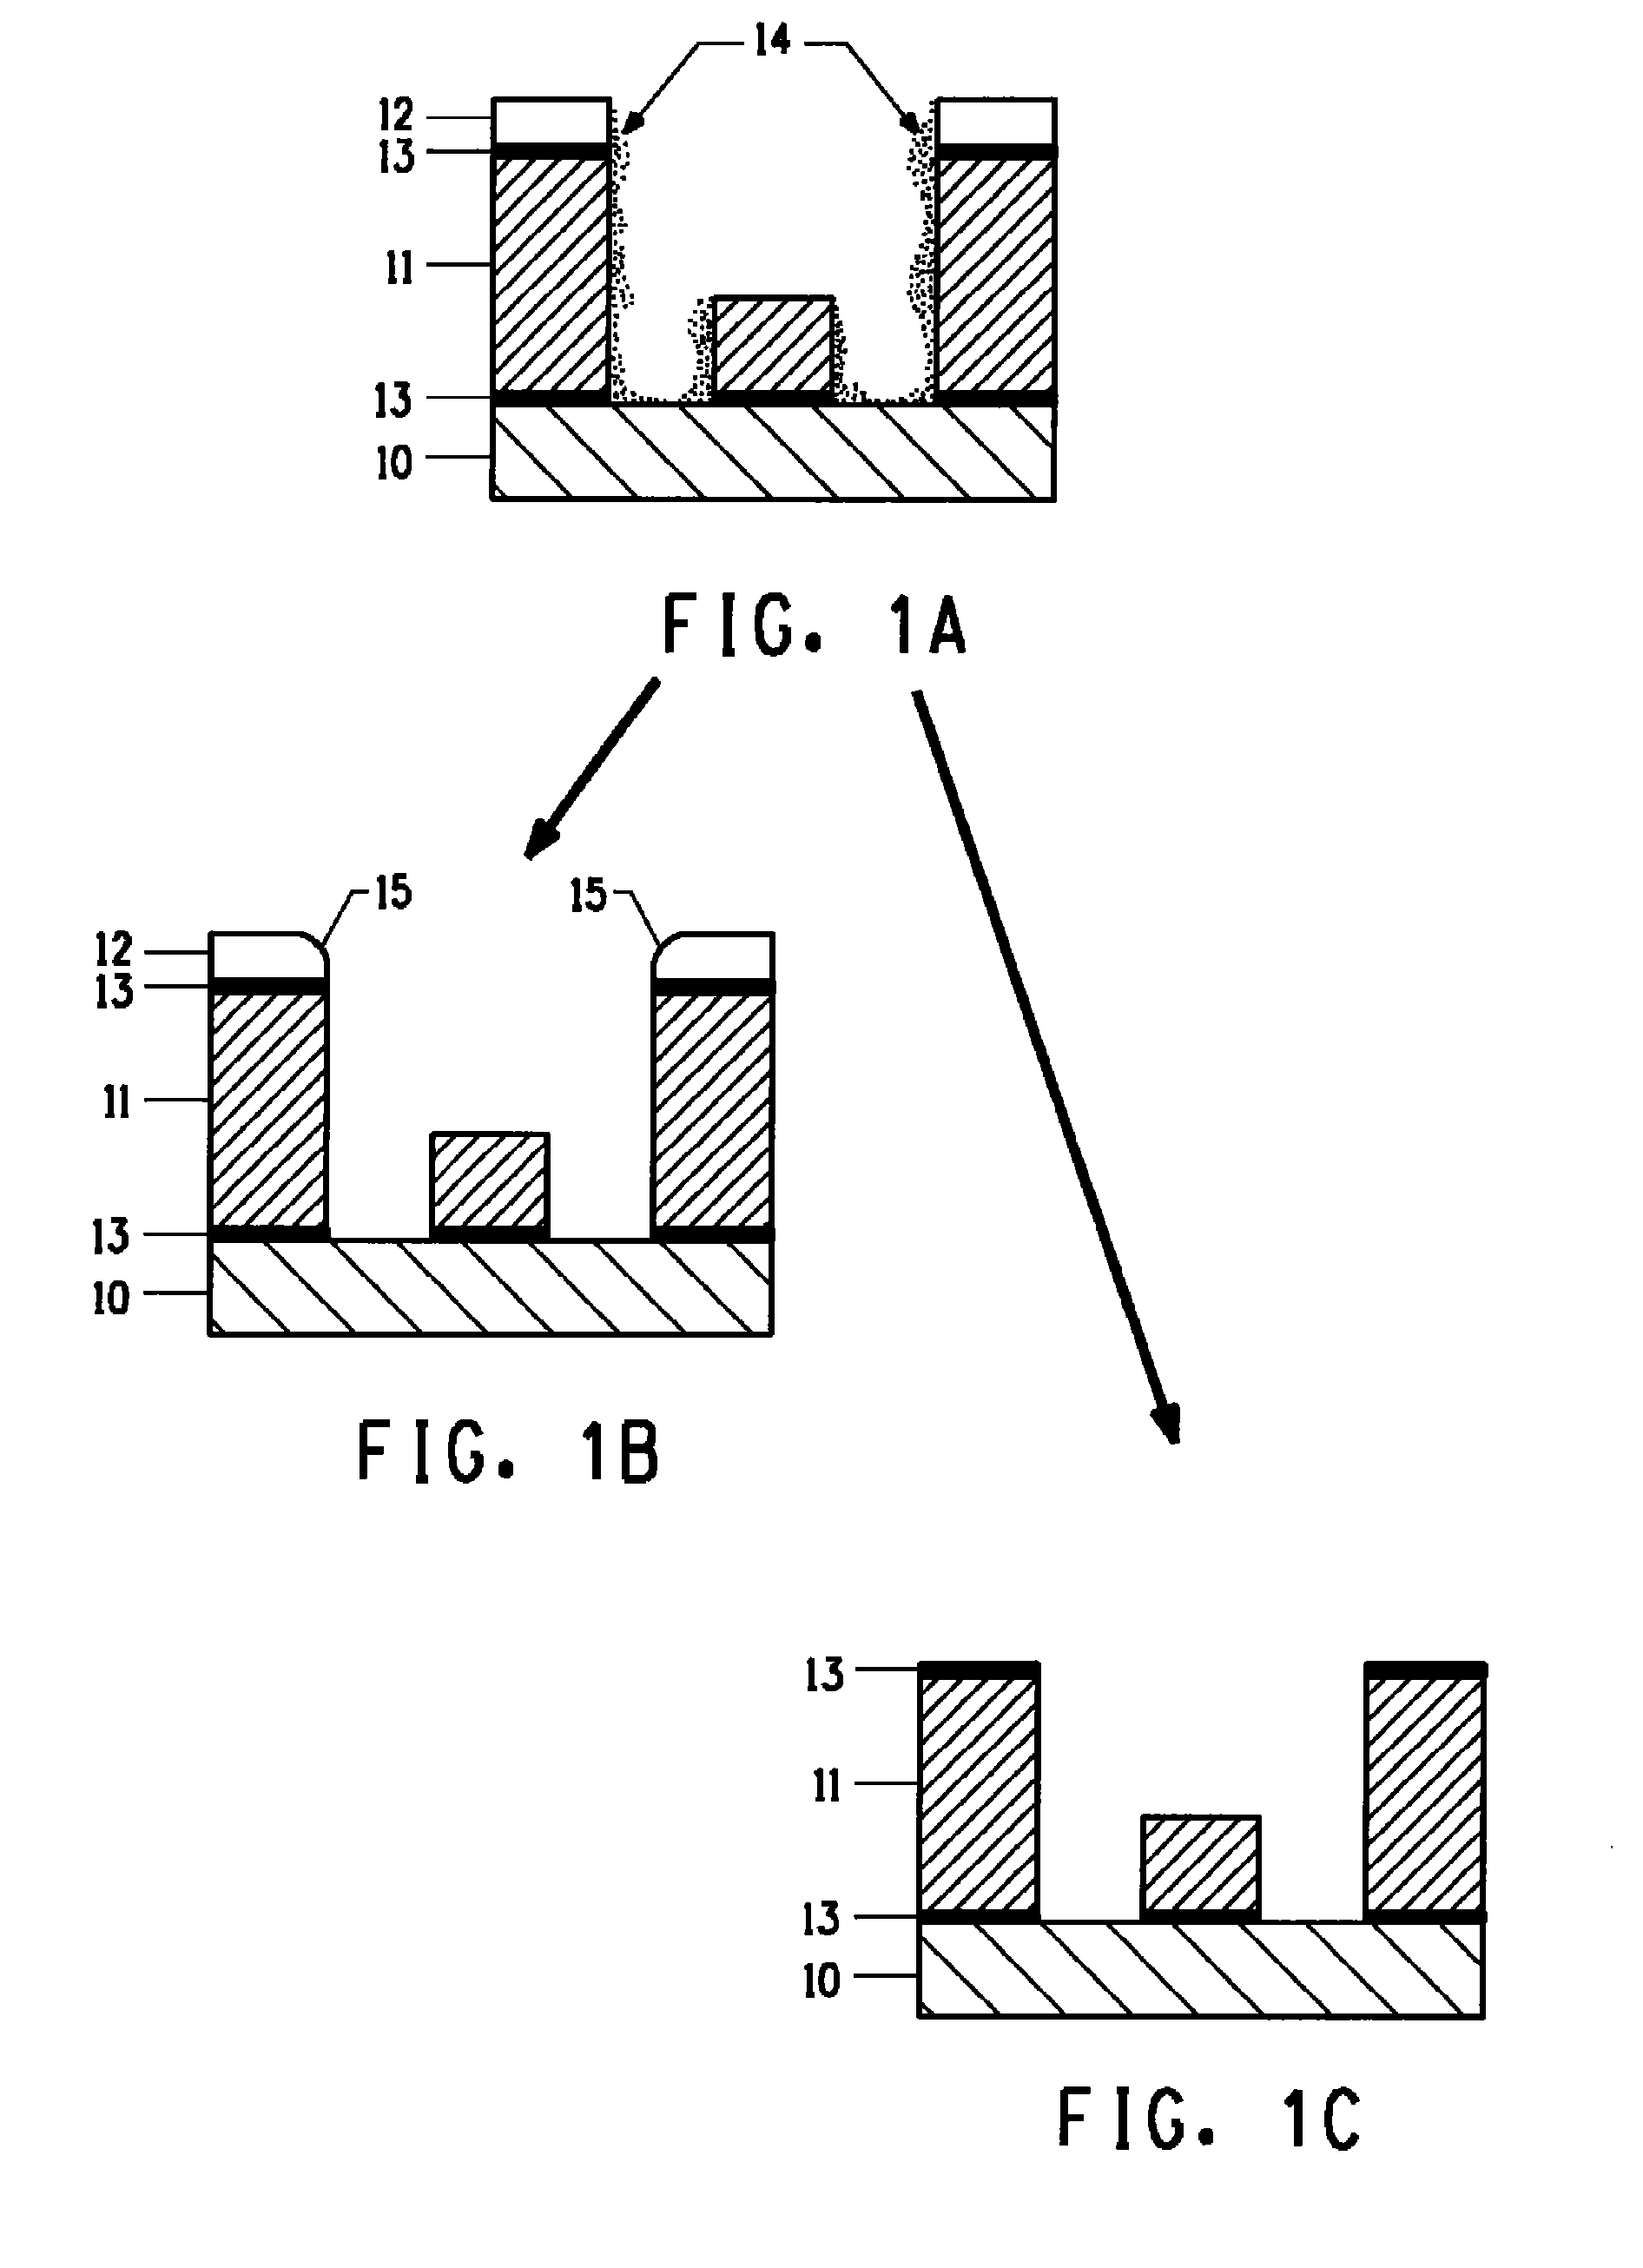 Method and composition for removing resist, etch residue, and copper oxide from substrates having copper, metal hardmask and low-k dielectric material